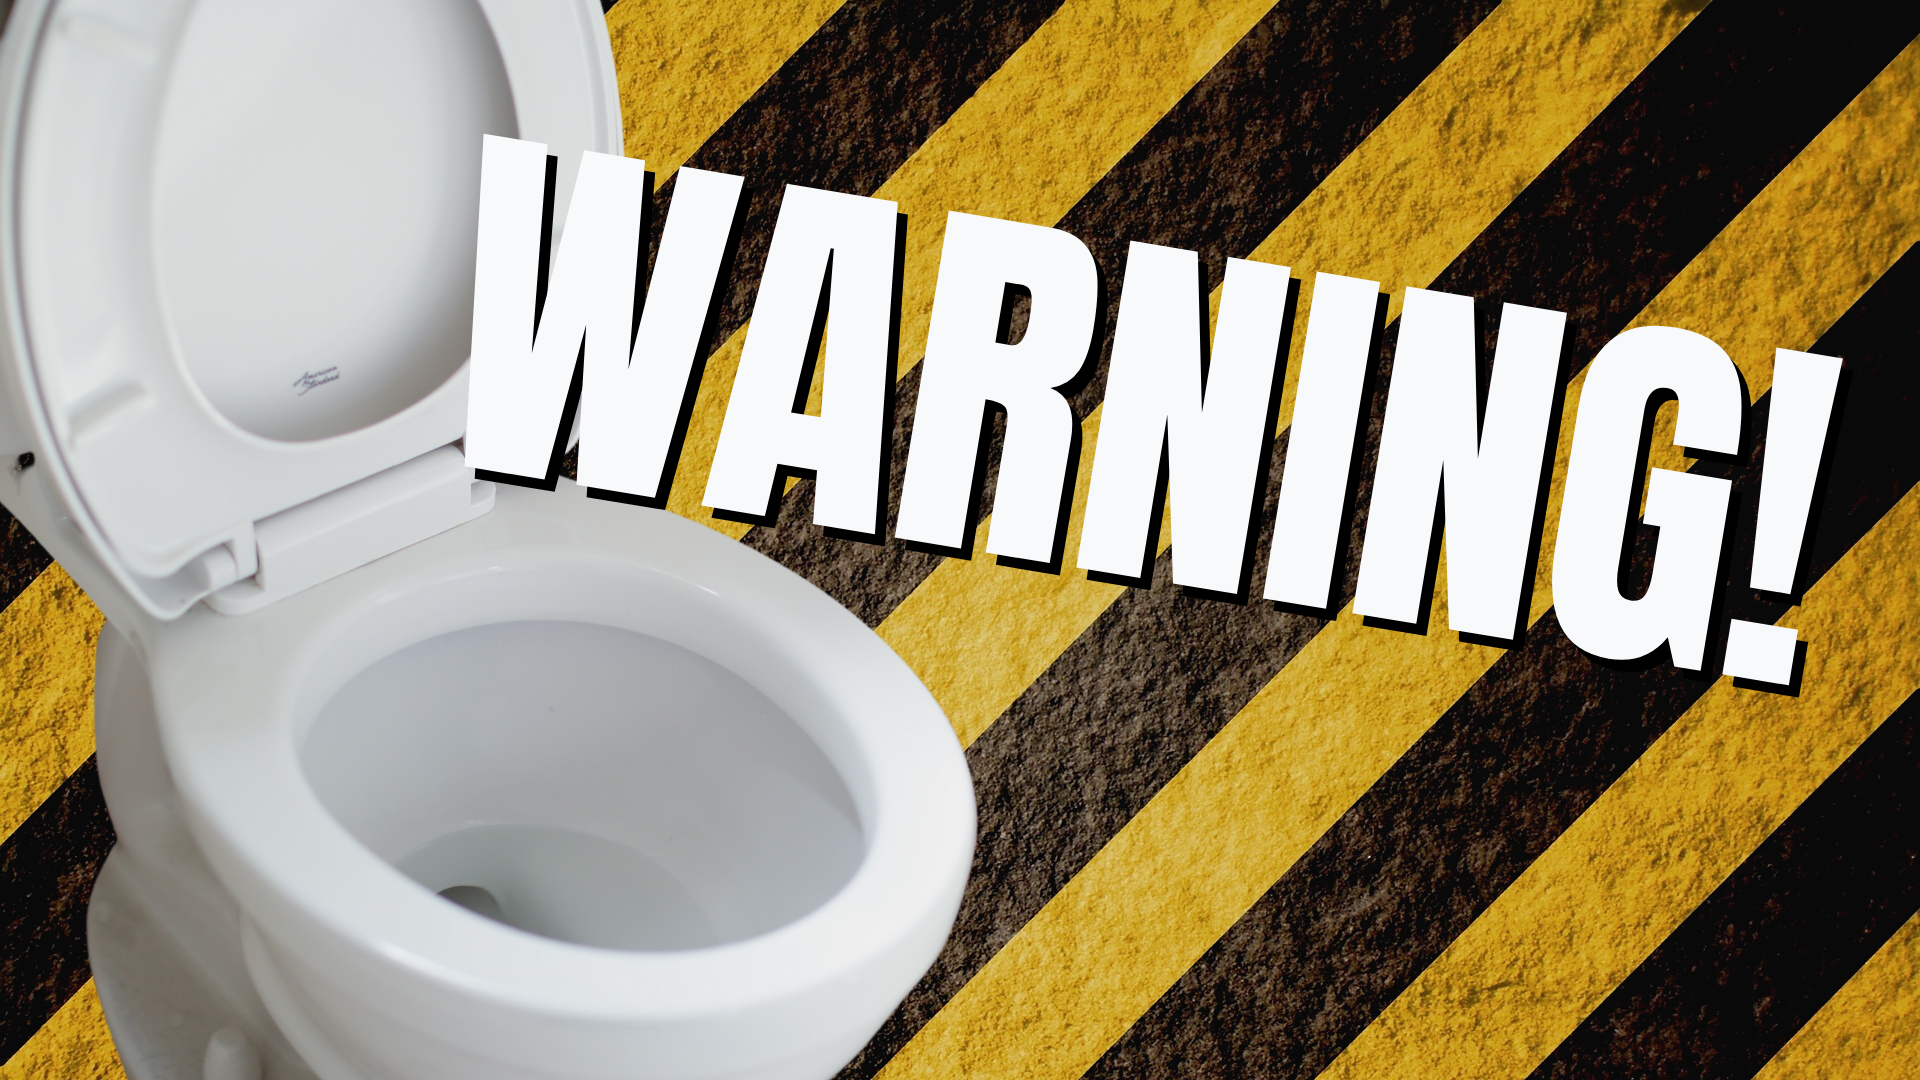 How to Unclog a Toilet Without a Plunger: 7 Easy Methods - Bob Vila